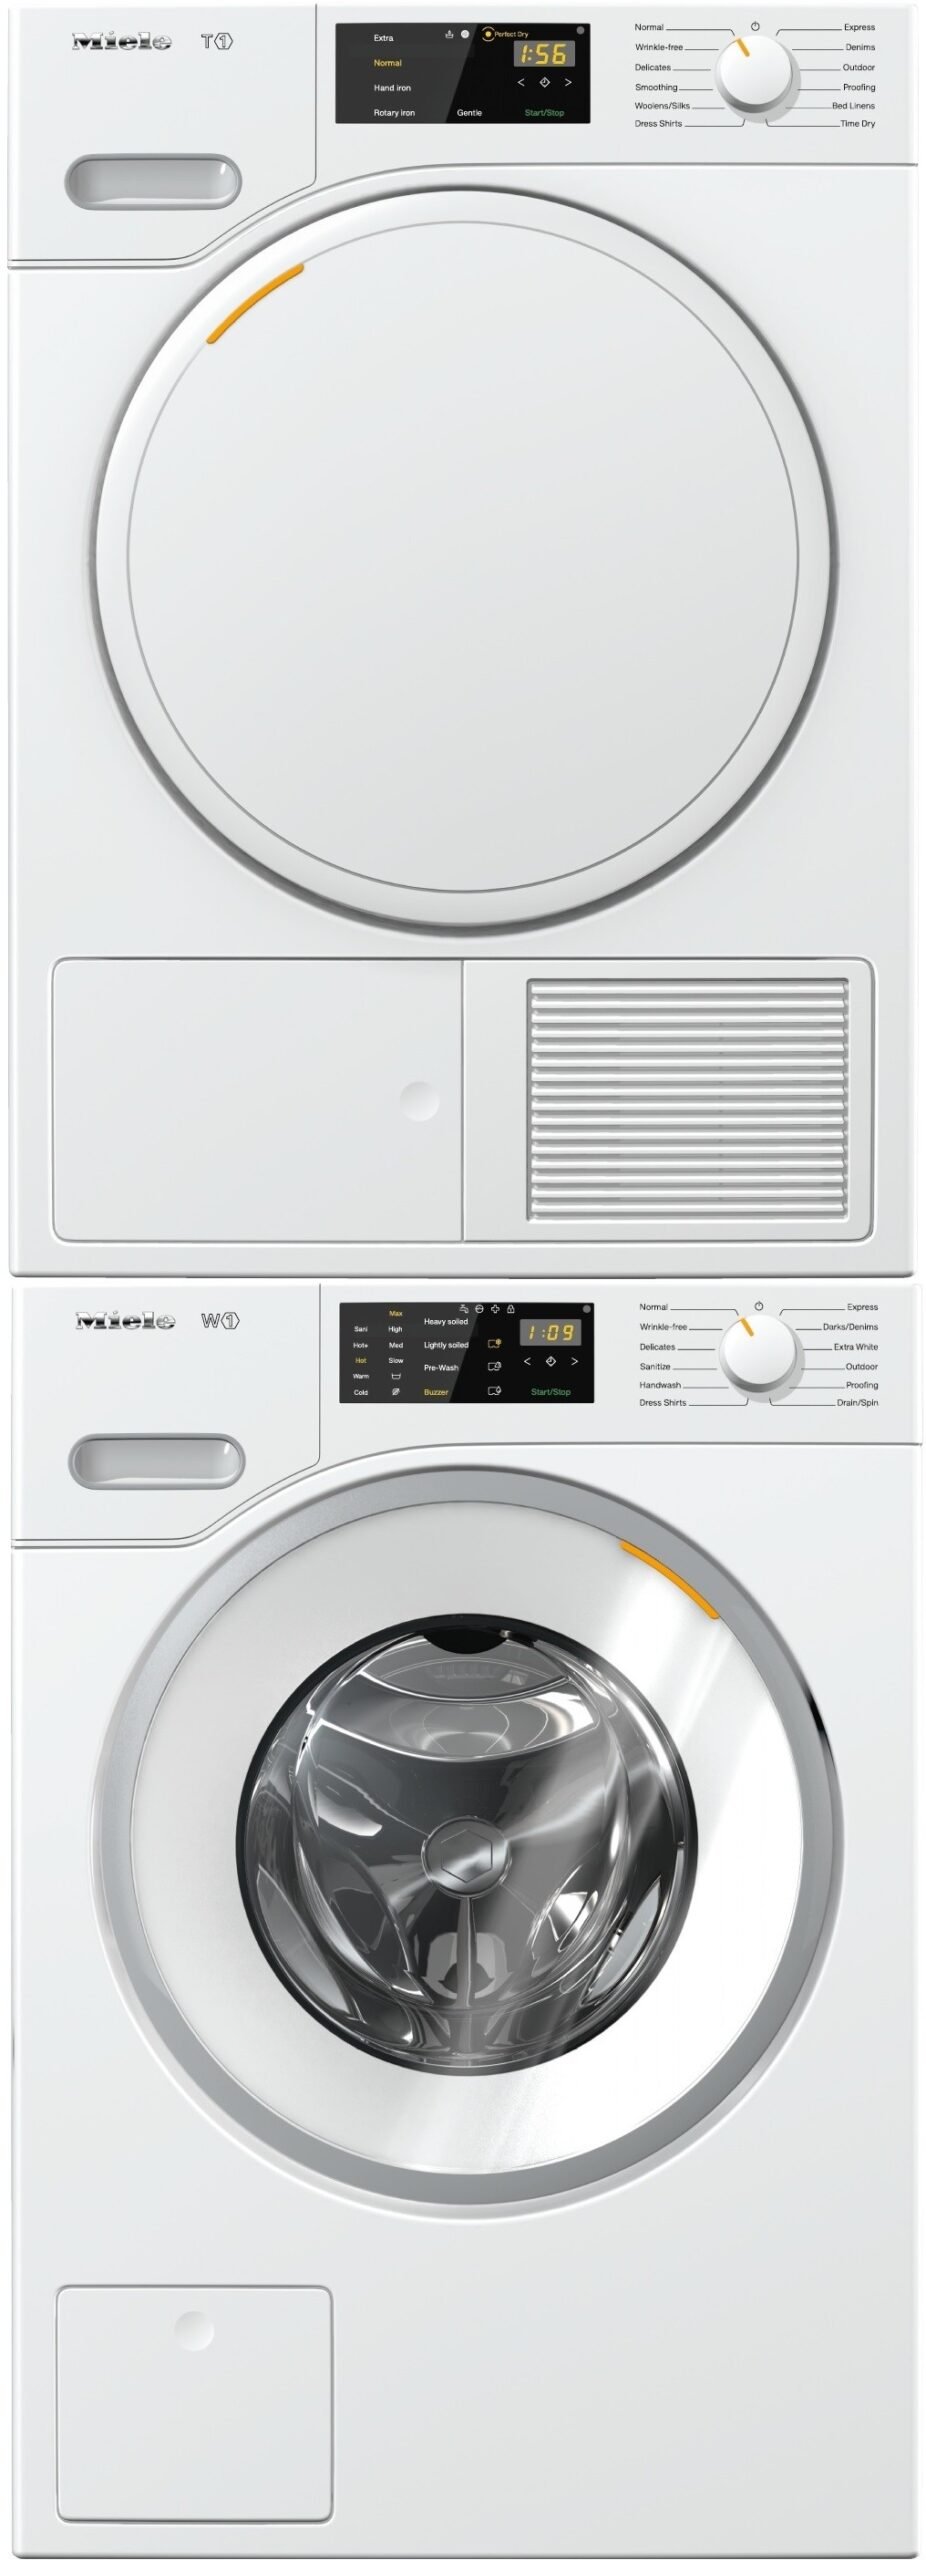 LG LGWADREW13882 Stacked Washer & Dryer Set with Front Load Washer and Electric Dryer in White